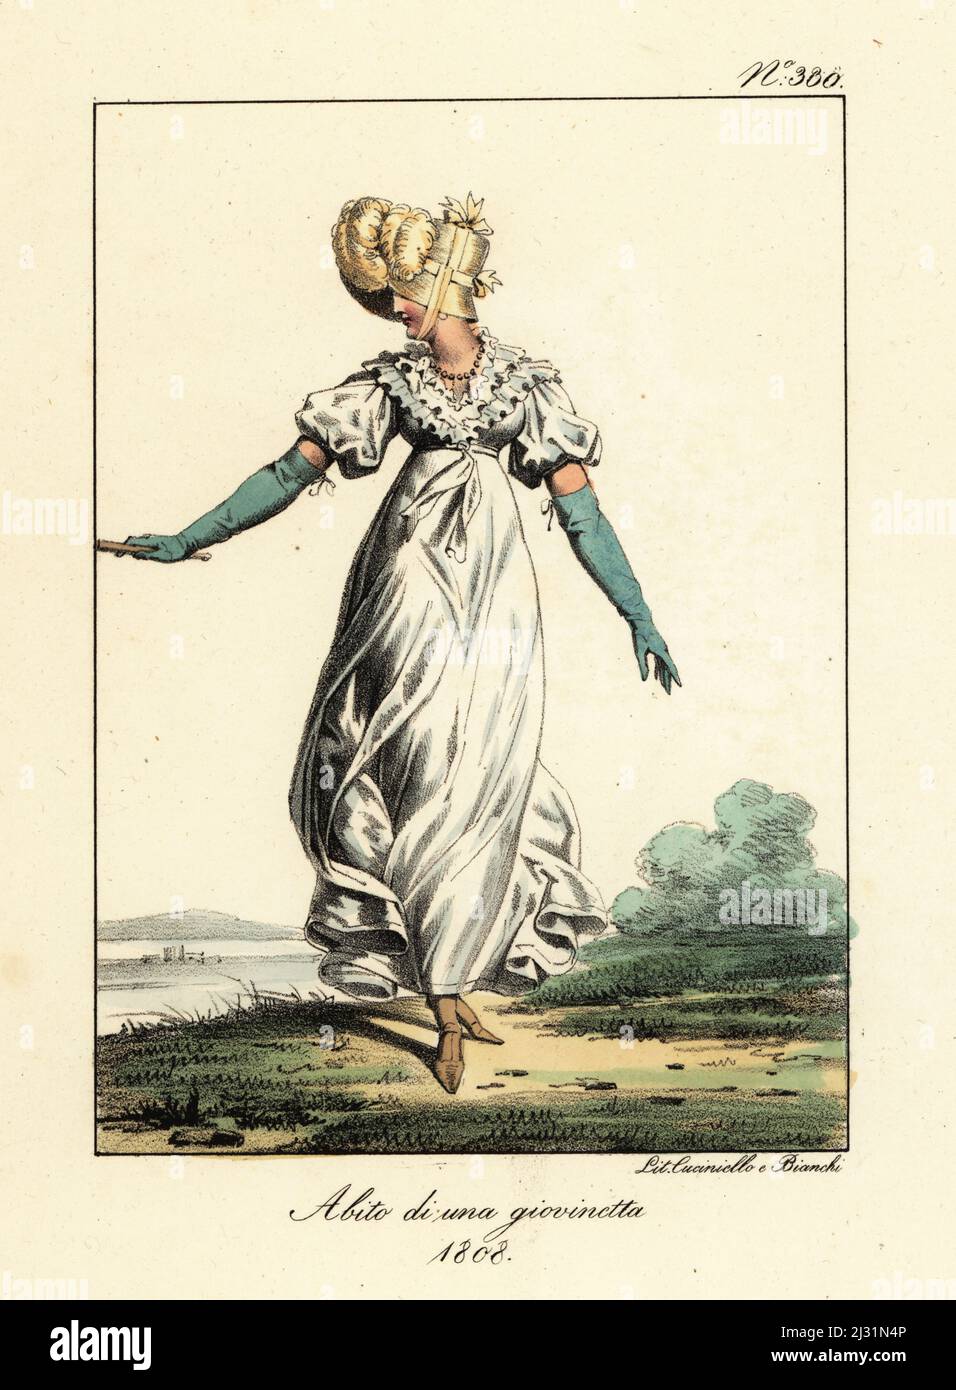 Costume of a young woman, First Empire, France. In plumed bonnet, gown with ruched sleeves and frilled collar, long gloves. Costume d'une Jeune Dame. 1808. Handcoloured lithograph by Lorenzo Bianchi and Domenico Cuciniello after Hippolyte Lecomte from Costumi civili e militari della monarchia francese dal 1200 al 1820, Naples, 1825. Italian edition of Lecomte’s Civilian and military costumes of the French monarchy from 1200 to 1820. Stock Photo